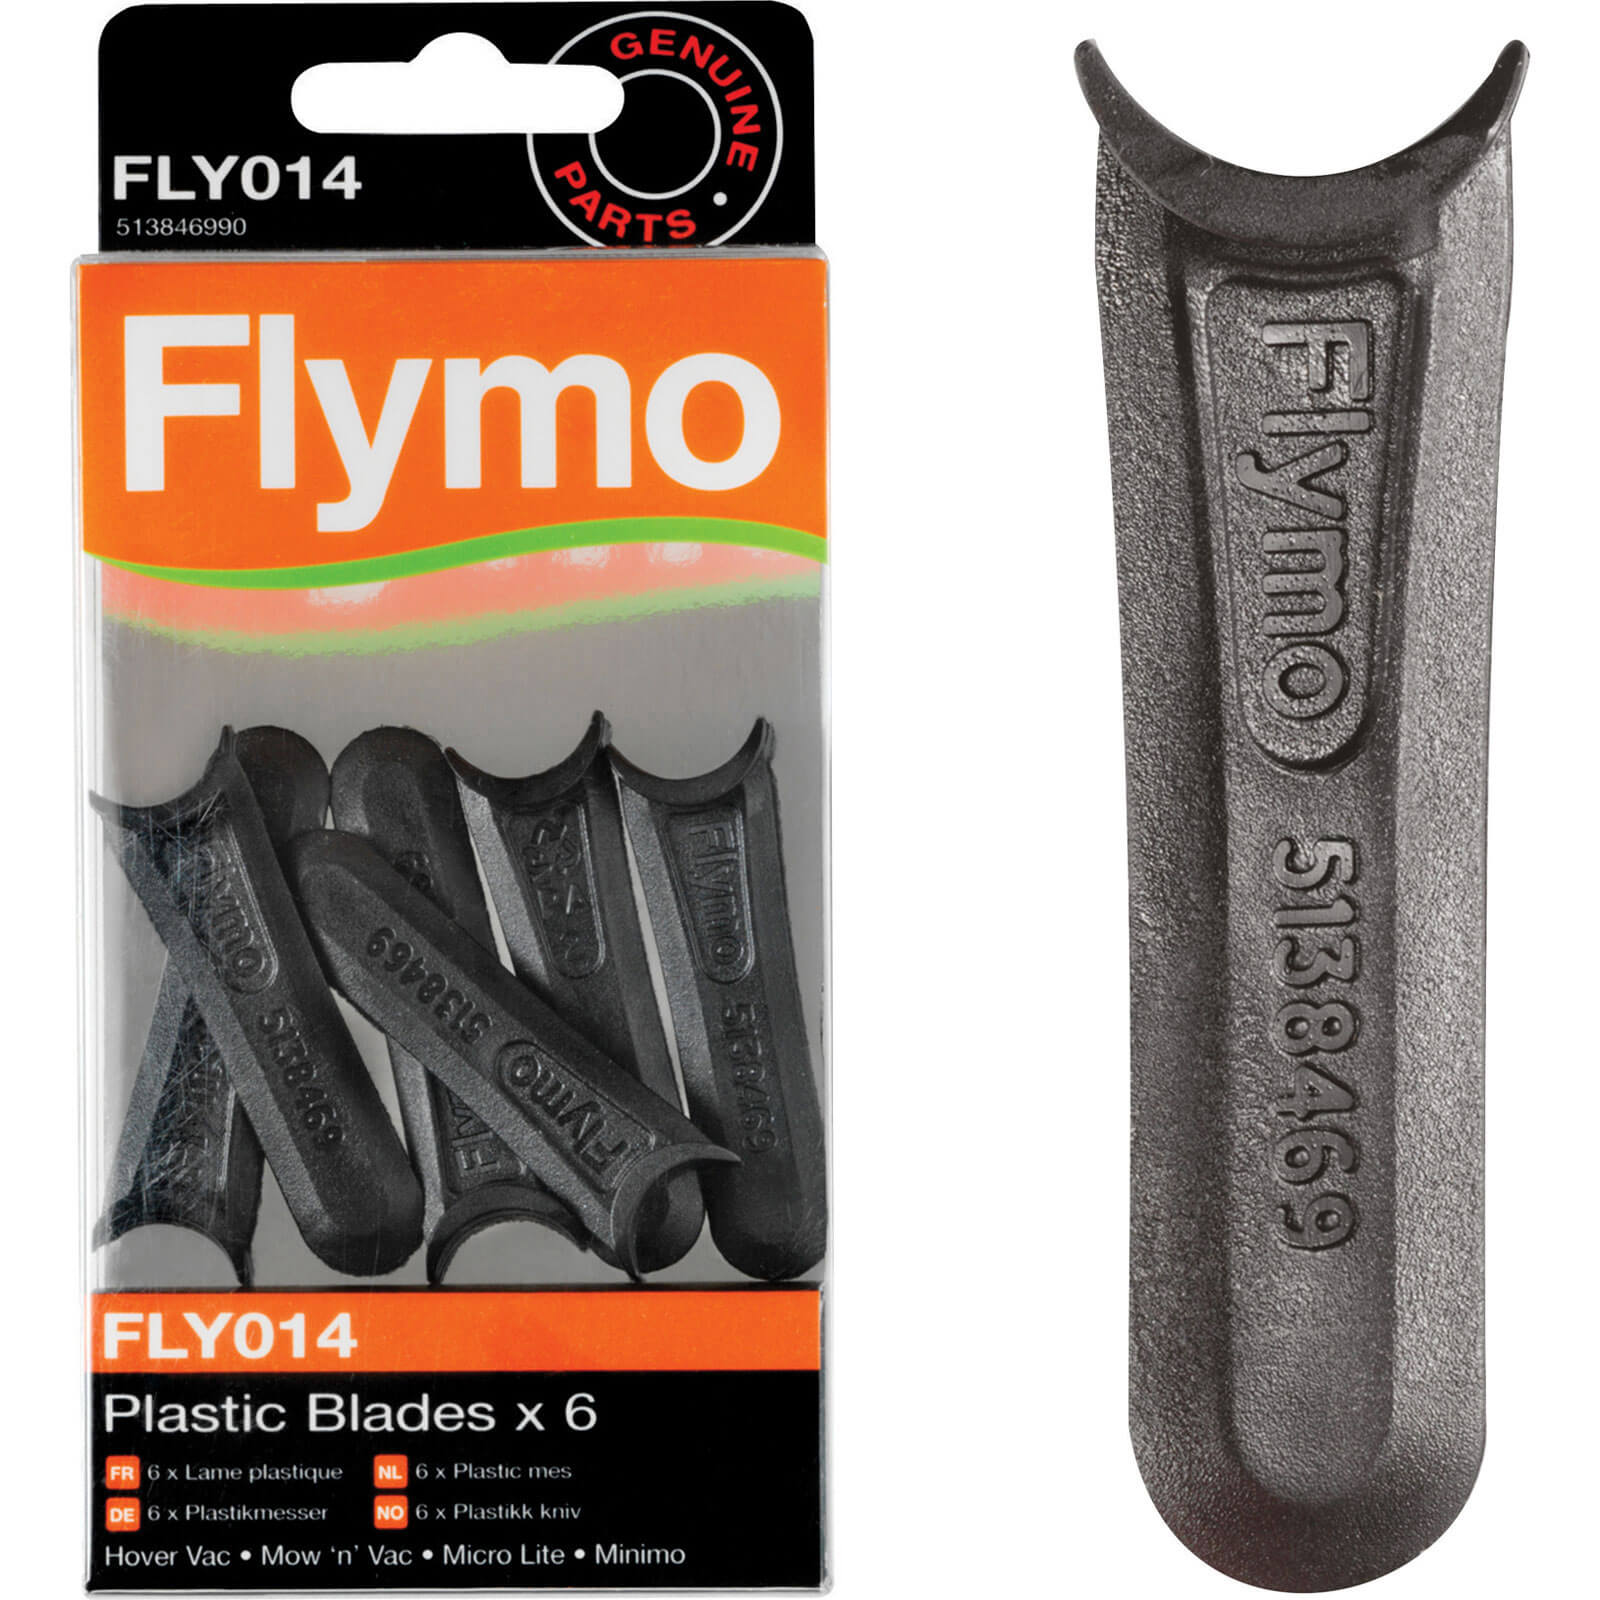 Image of Flymo FLY014 Genuine Blades for Microlite, Minimo, Hover Vac and Mow n Vac Hover Mowers Pack of 6